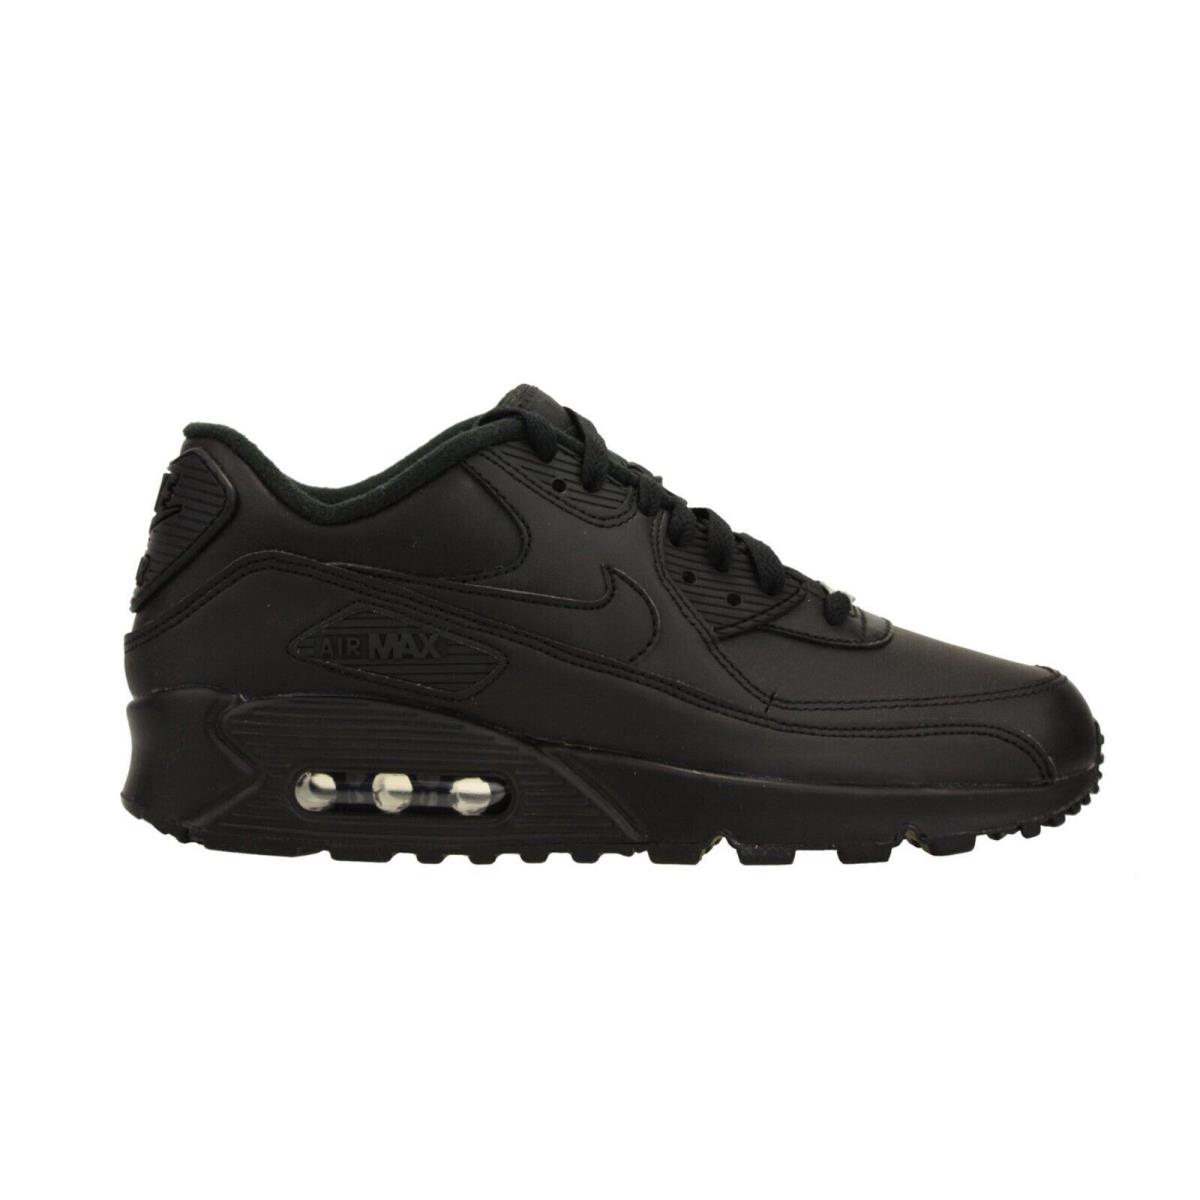 Nike Mens Air Max 90 Leather Running Shoes Black/black 302519-001 Size 12